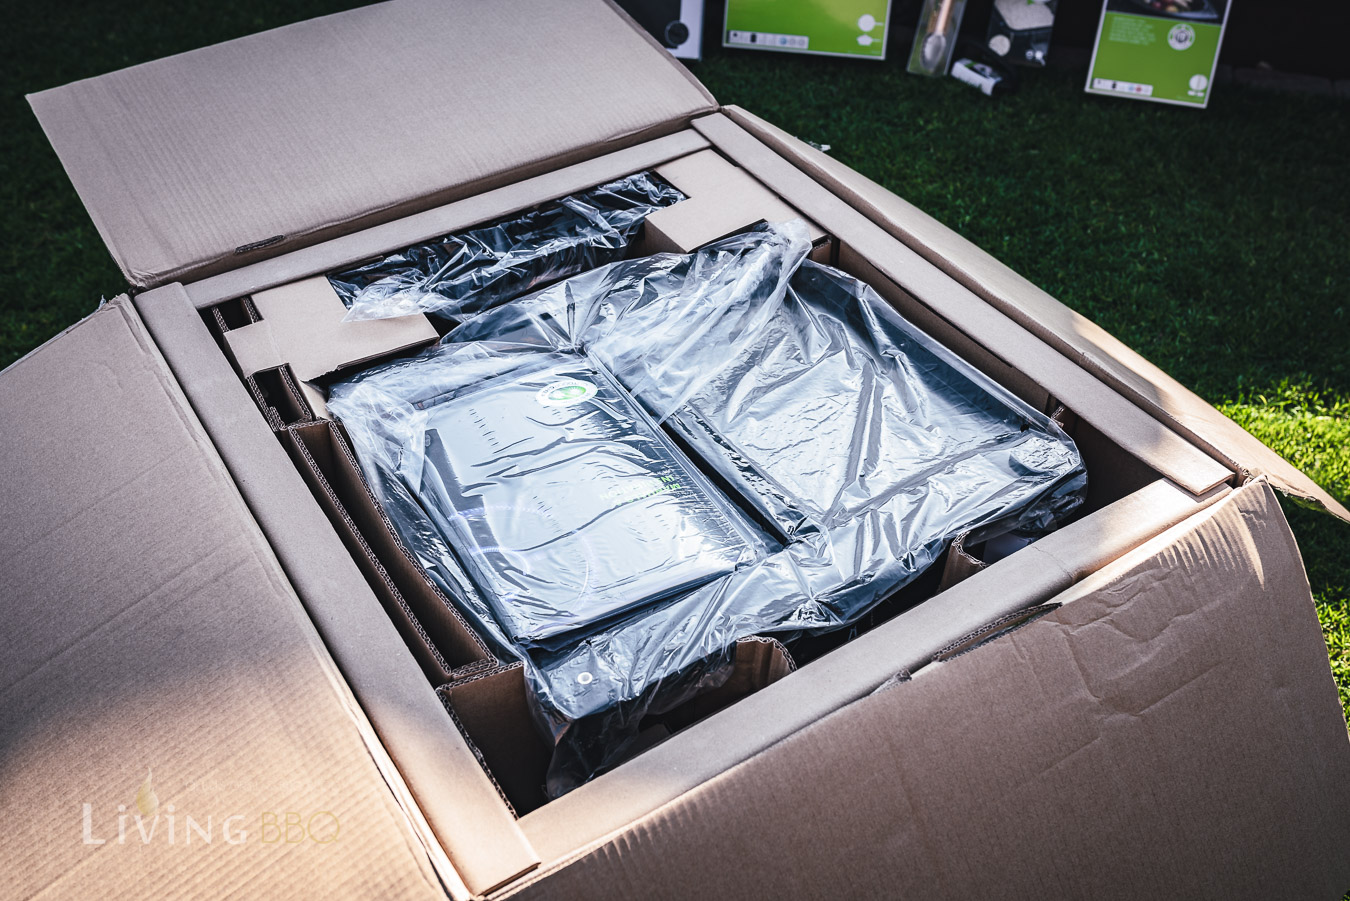 Outdoorchef Davos 570 G Pro Unboxing